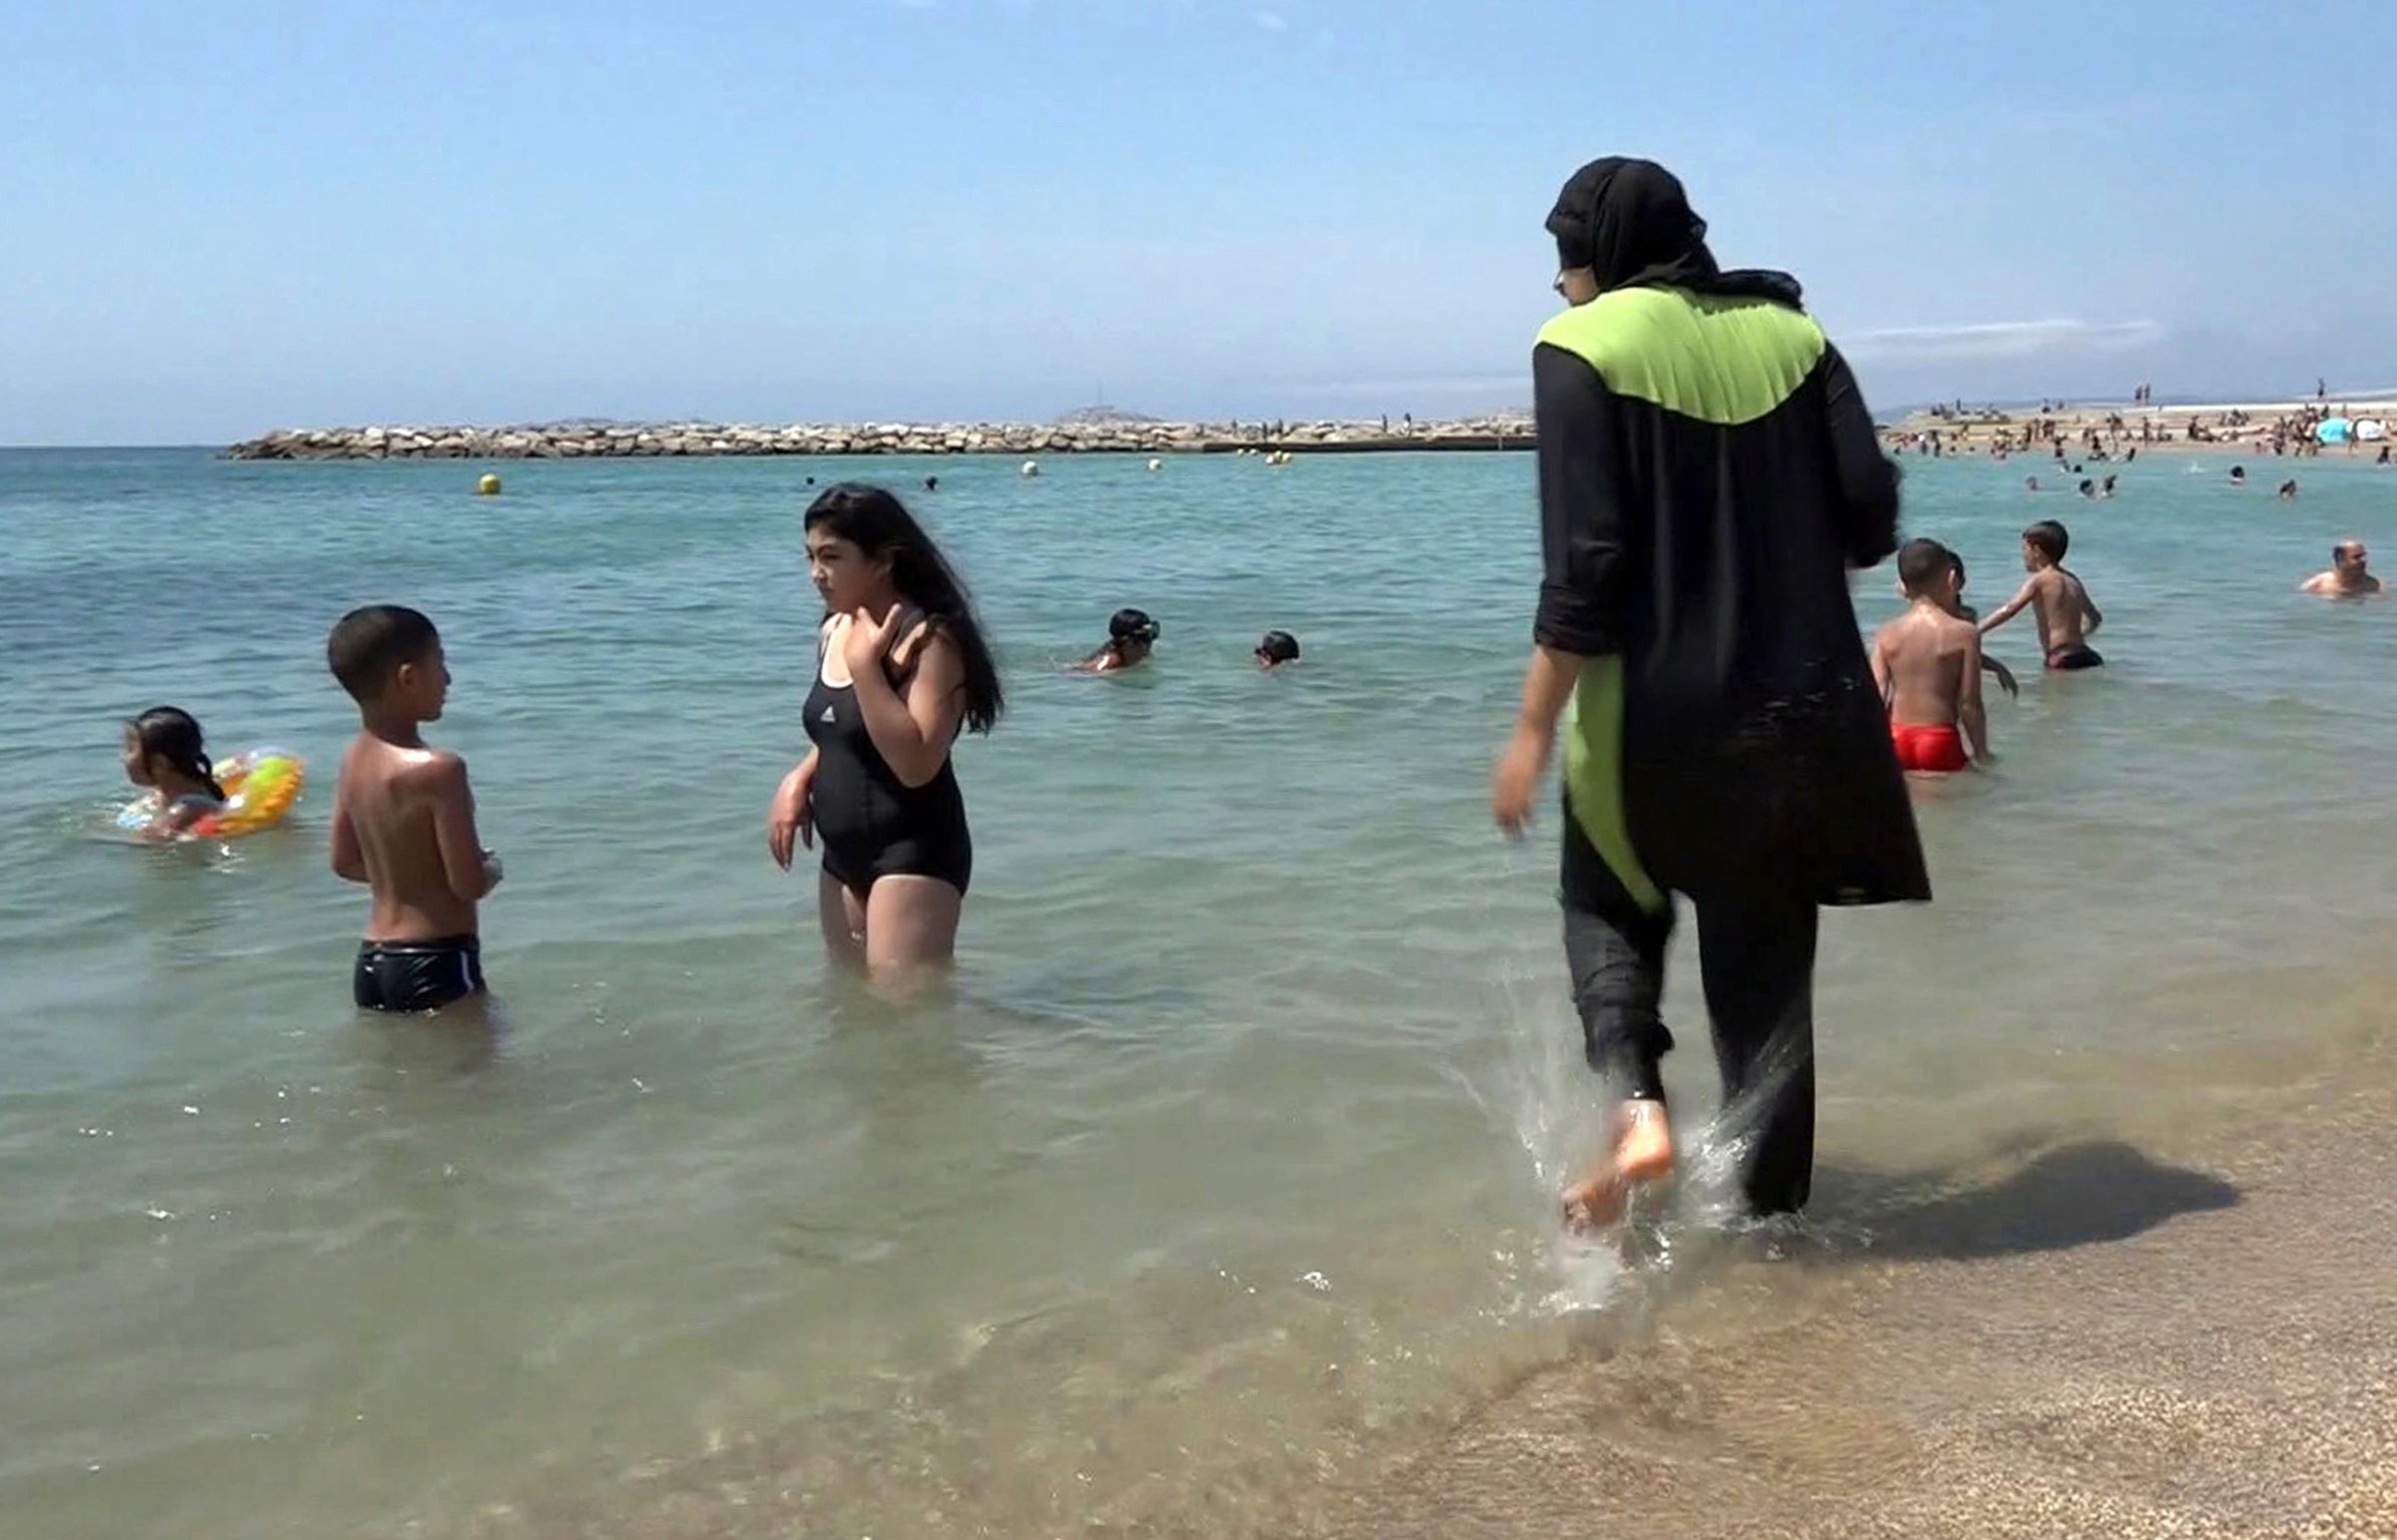 FILE - In this Aug. 4 2016 file photo made from video, Nissrine Samali, 20, gets into the sea wearing a burkini, a wetsuit-like garment that also covers the head, in Marseille, southern France. France's top administrative court has overturned Friday Aug. 26, 2016 a town burkini ban amid shock and anger worldwide after some Muslim women were ordered to remove body-concealing garments on French Riviera beaches. (AP Photo, File)